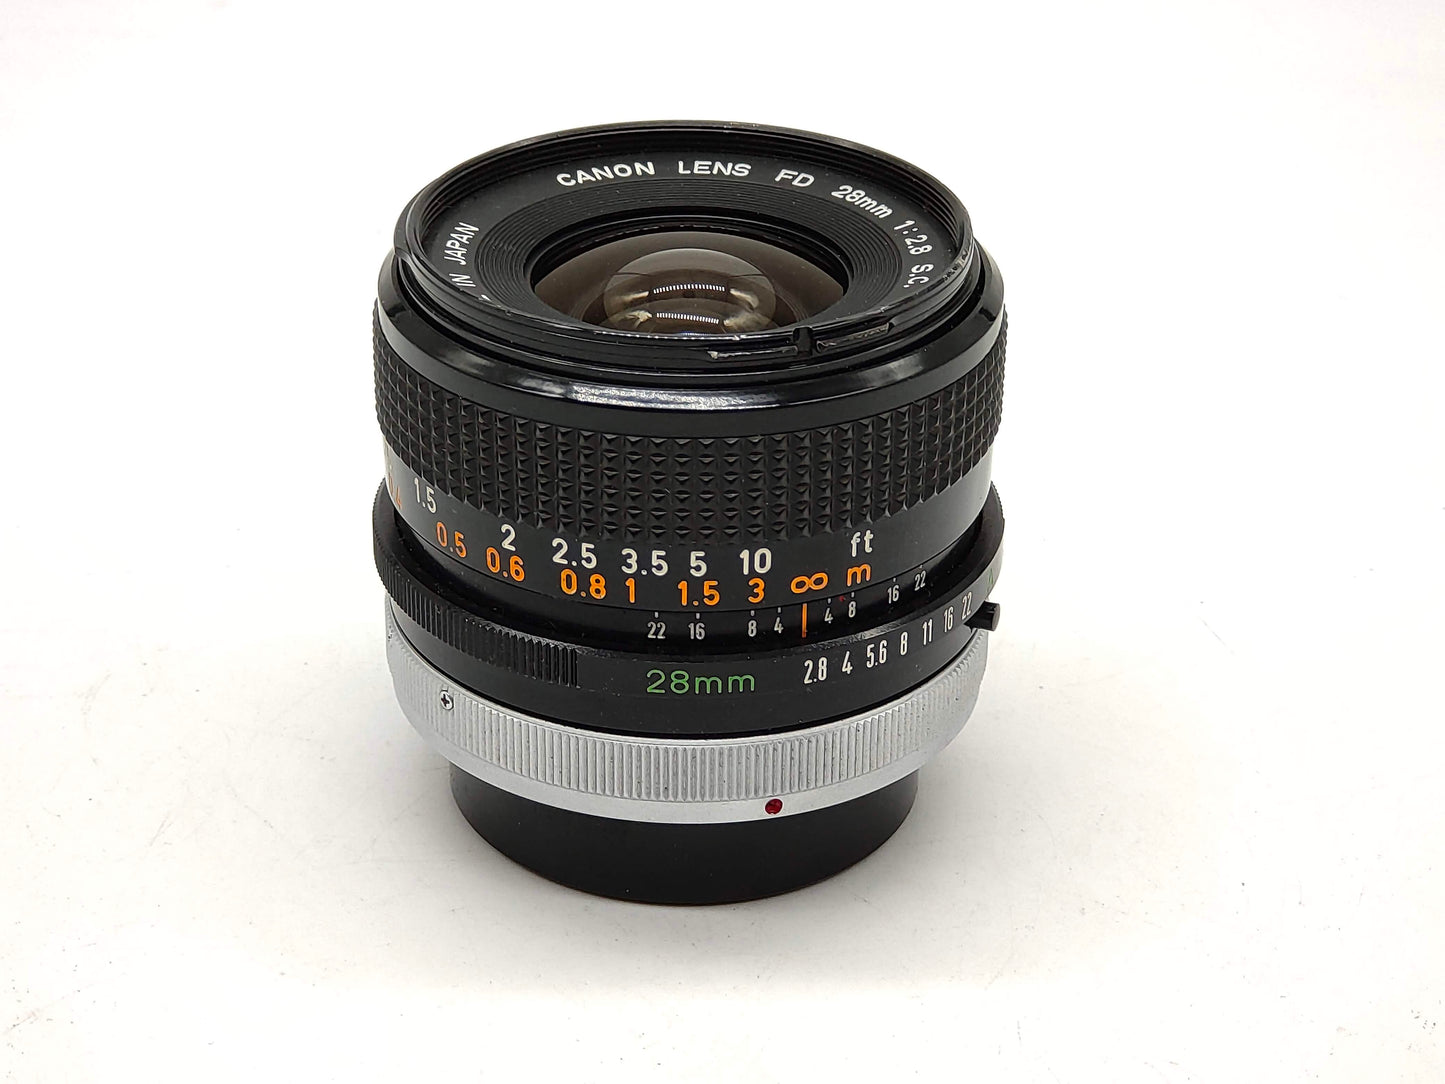 Canon 28mm f/2.8 wide-angle lens